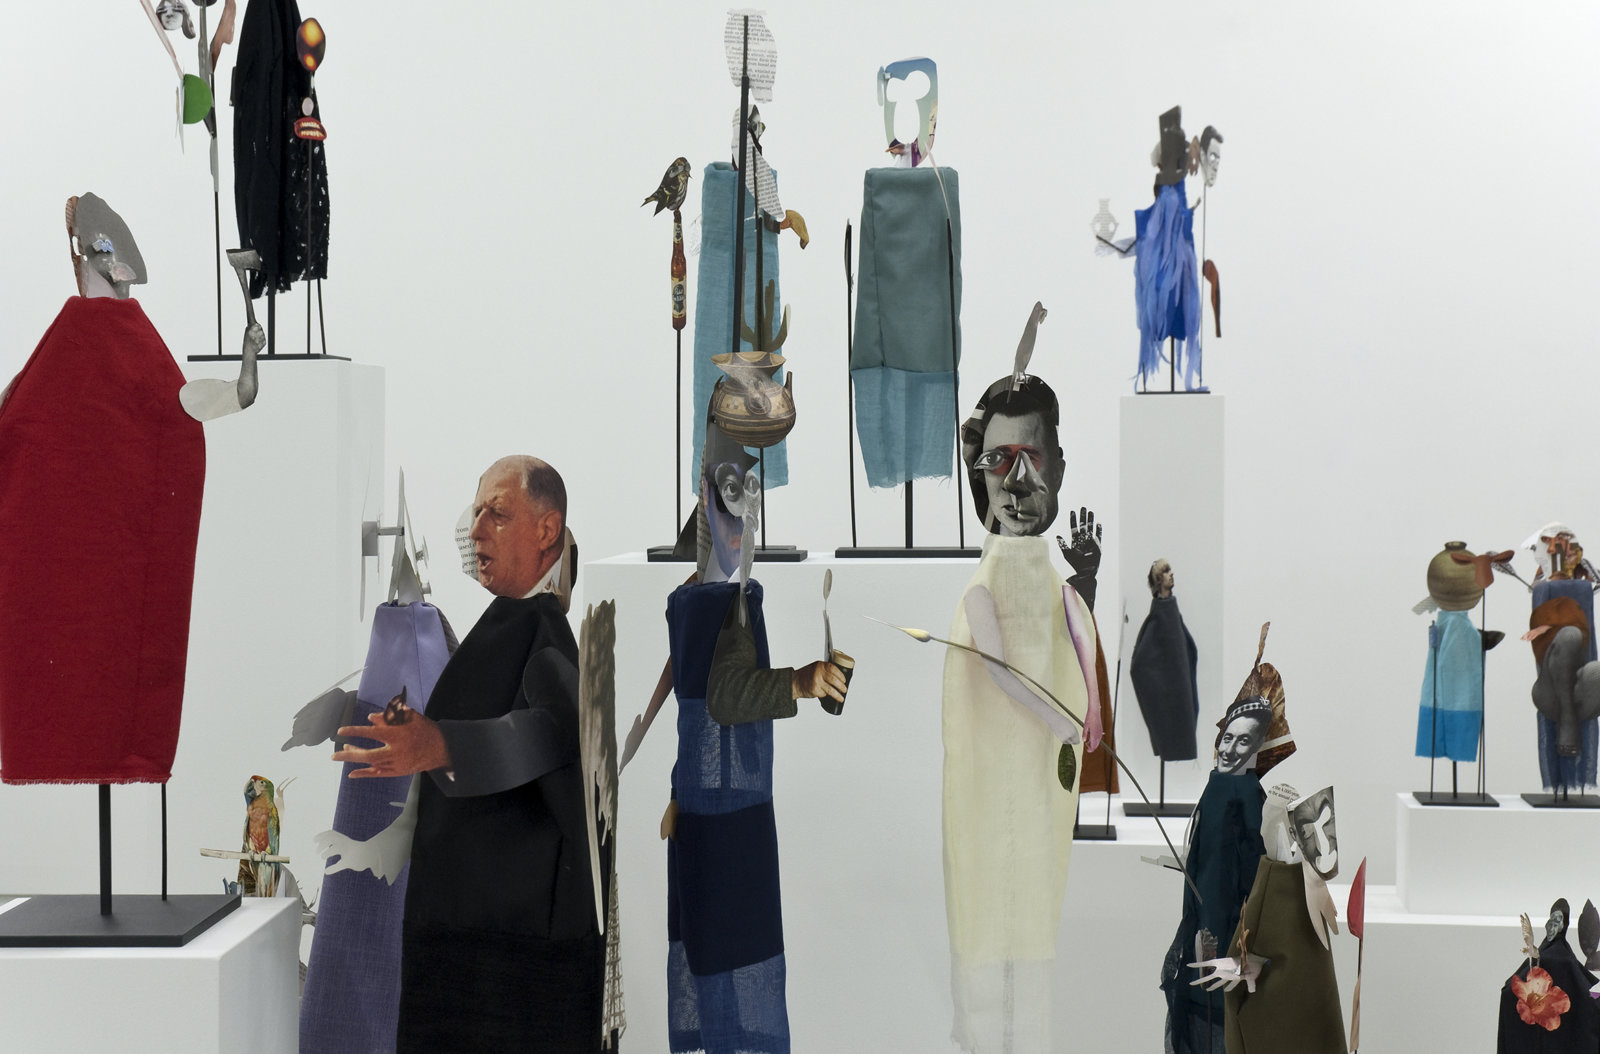 Geoffrey Farmer, The Surgeon and the Photographer, 2009, paper, textile, wood, metal, 365 figures, each figure approximately 18 x 5 x 5 in. (45 x 13 x 13 cm). Installation view, Catriona Jeffries, 2010